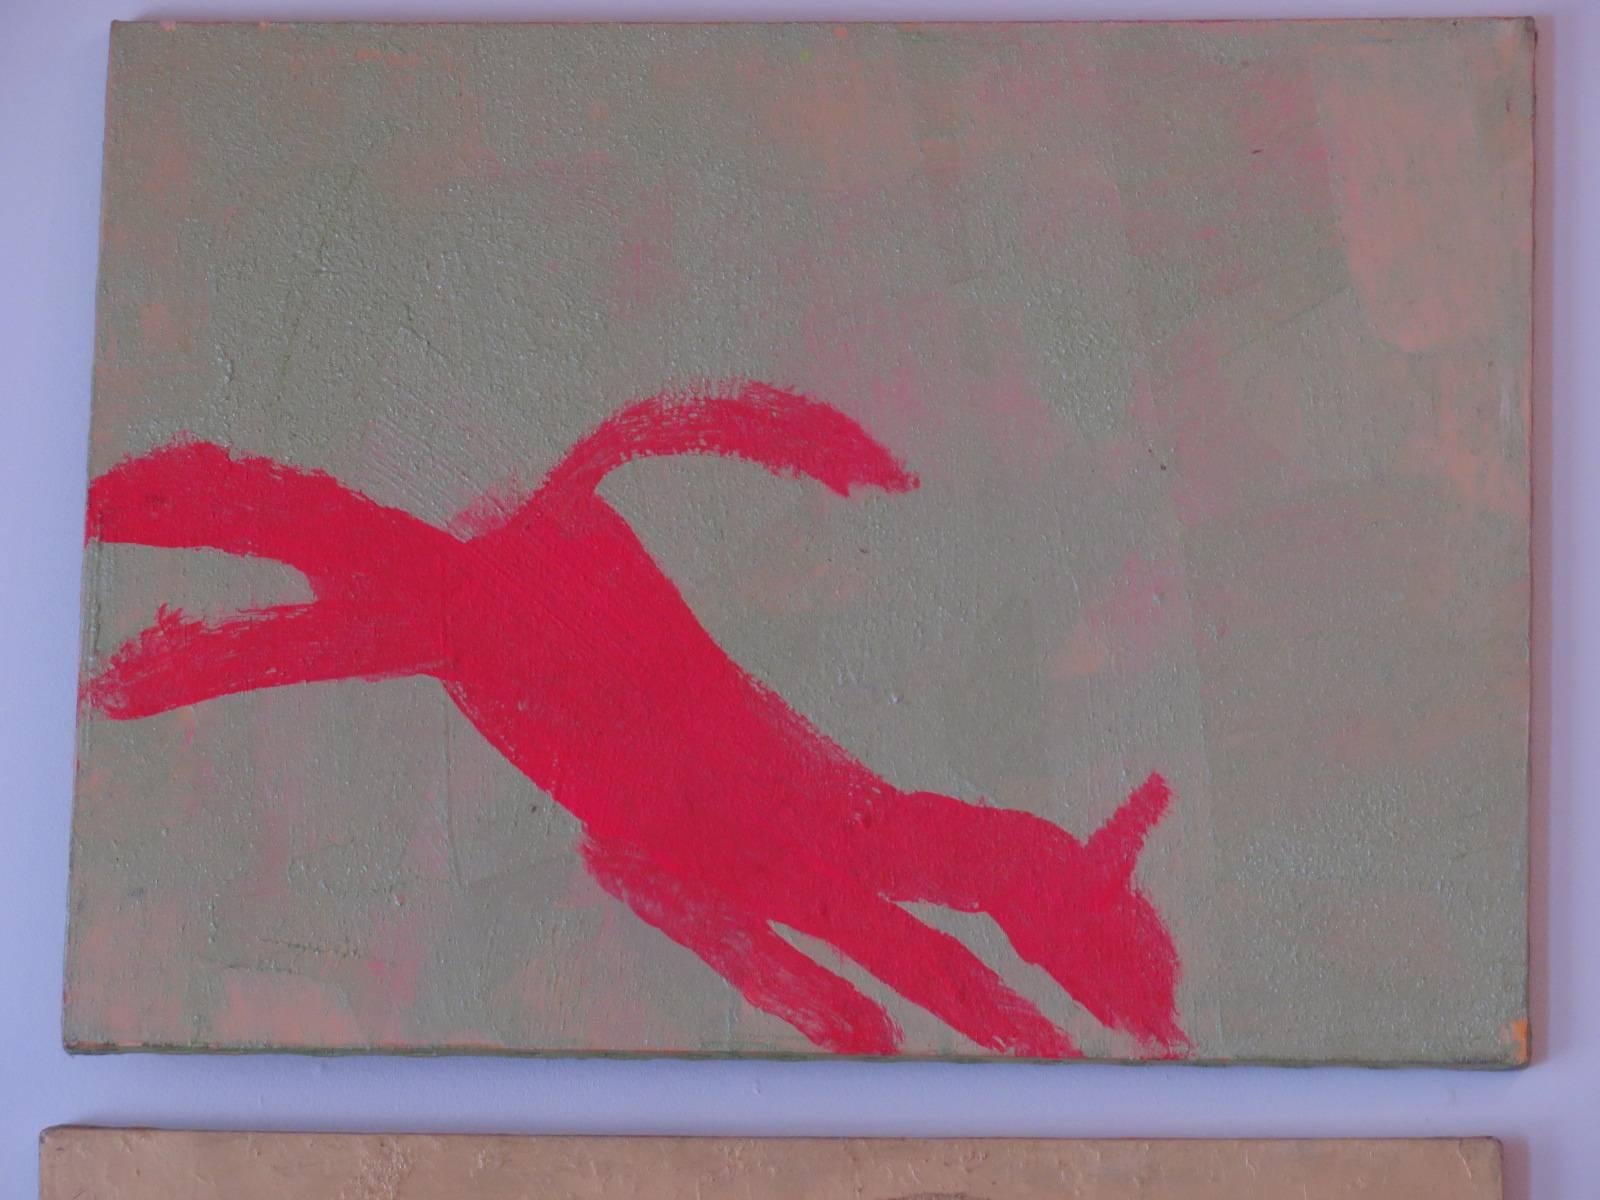 Acrylic on canvas by Peter Mayer, circa 1990. Abstract Expressionist painting of dog in red and green. The artist was well known on the New York City graffiti scene for his paintings of dogs spray painted on buildings in lower Manhattan. Stamped